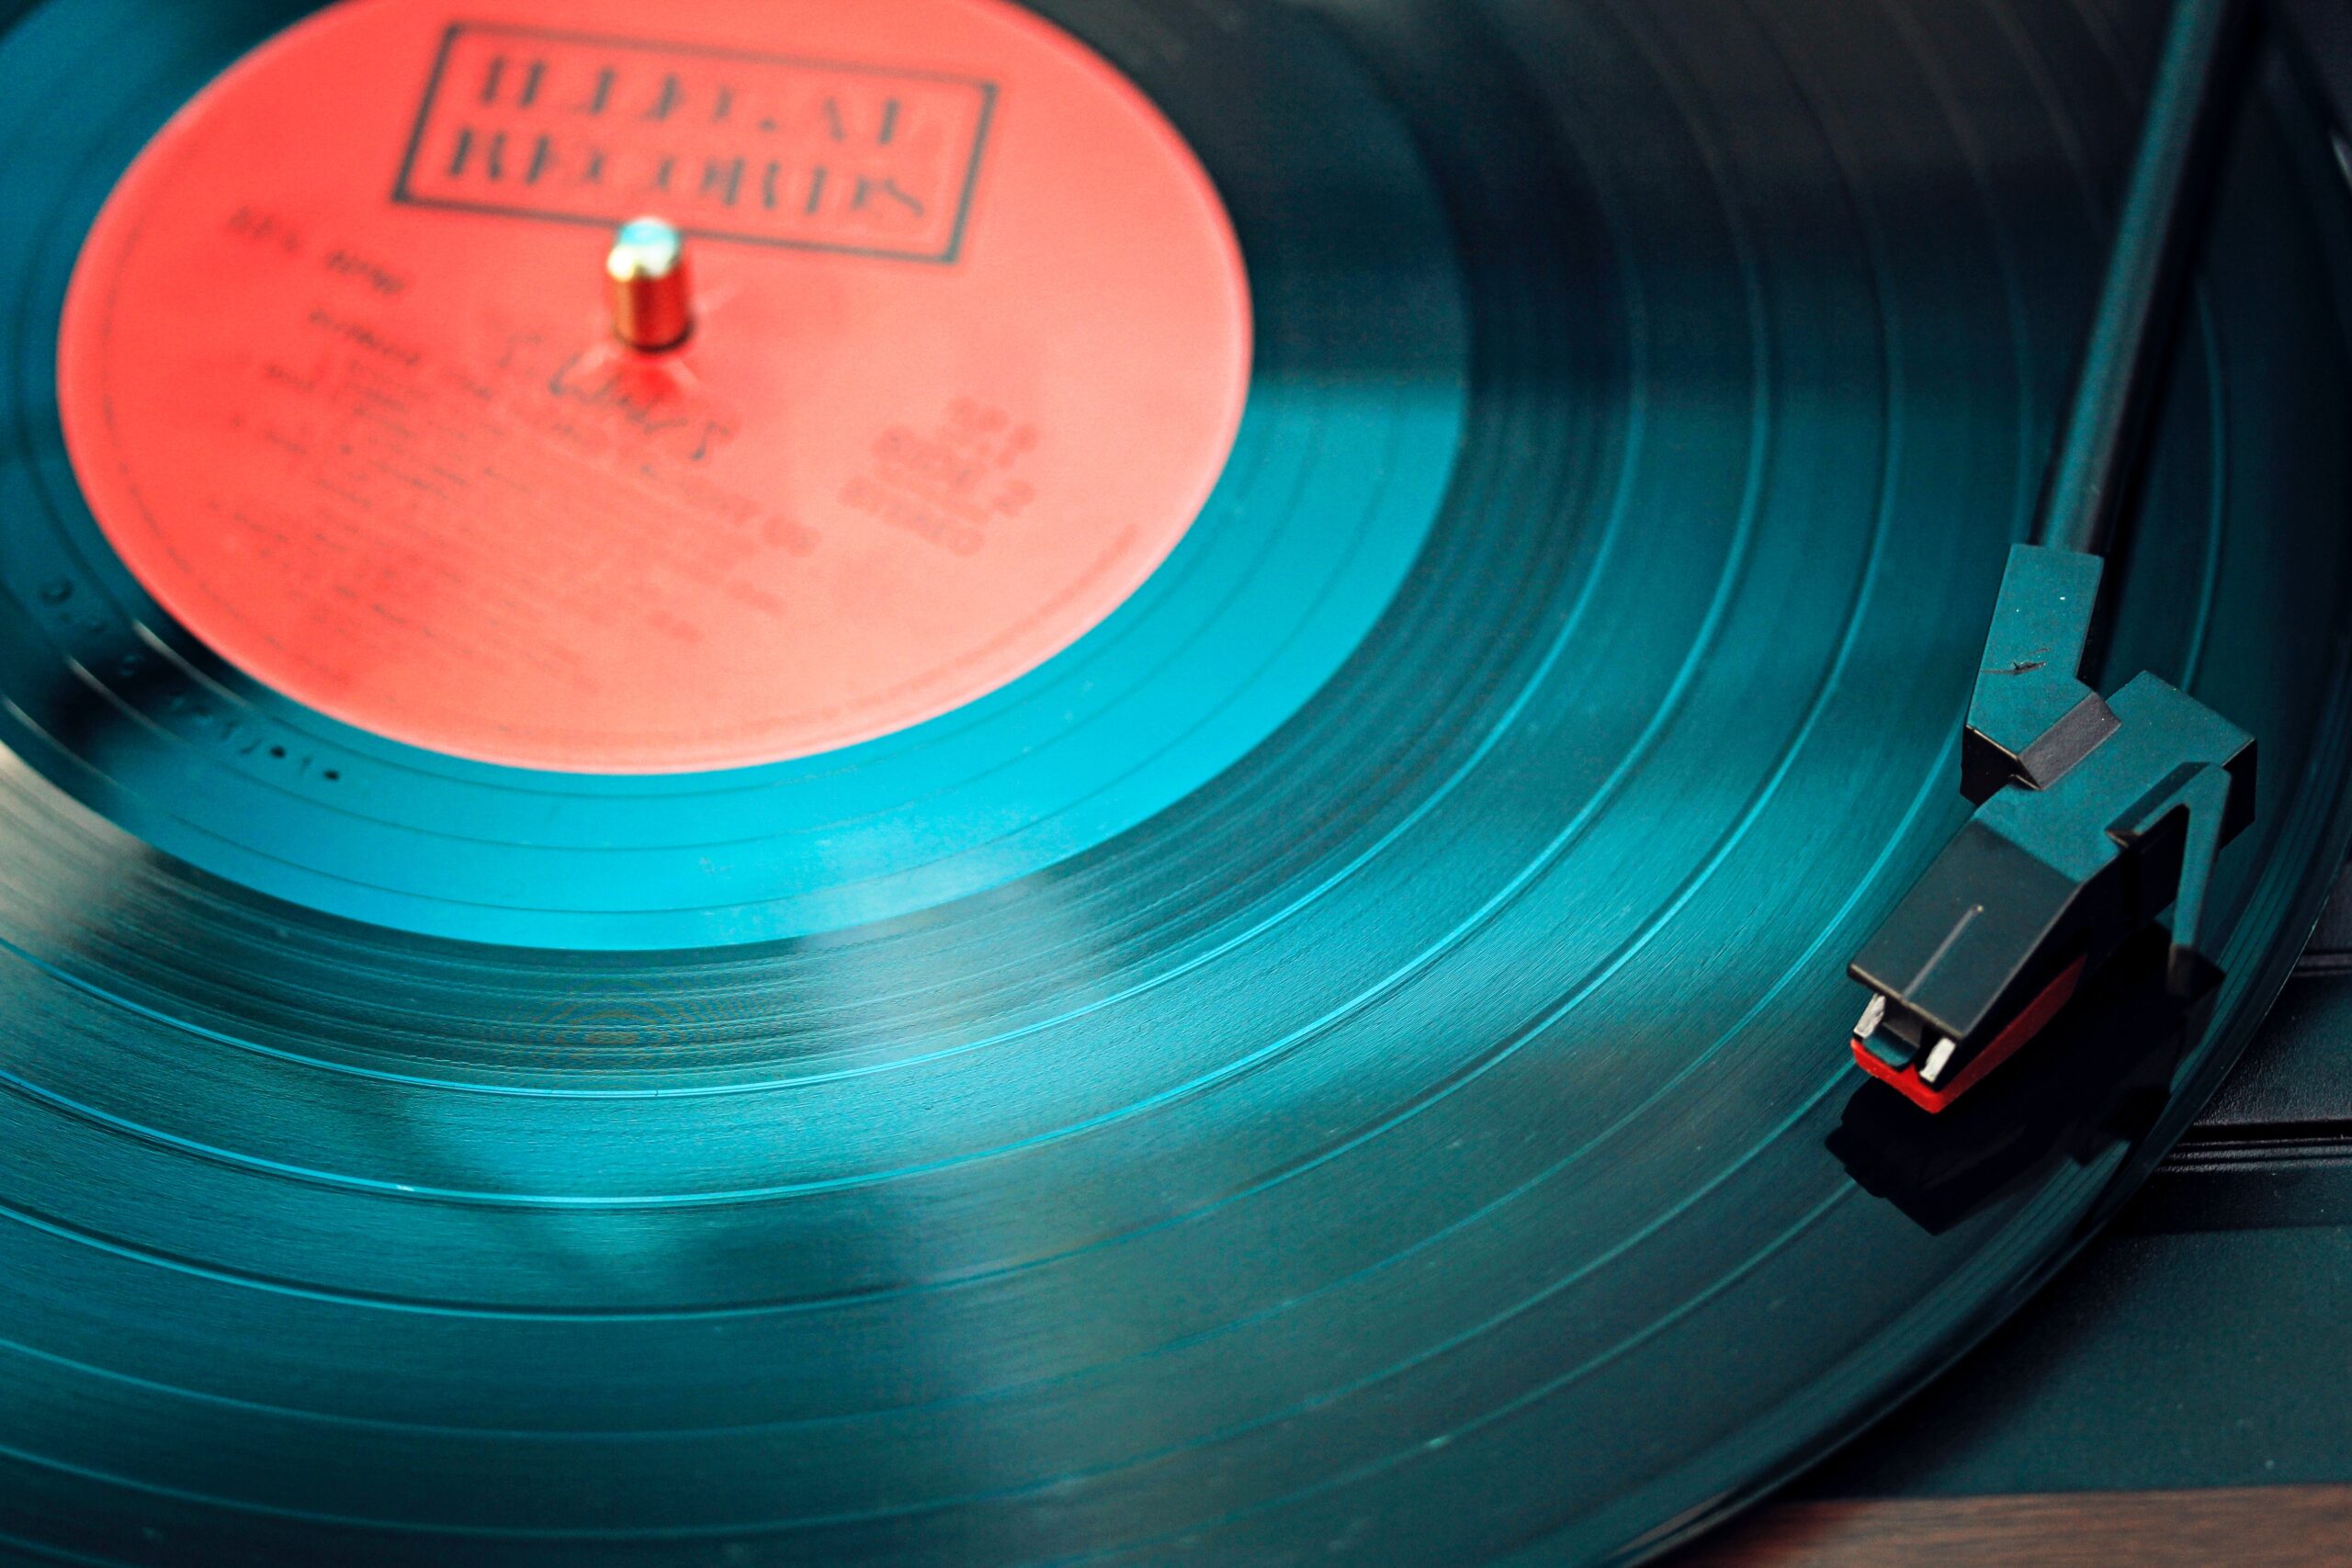 Vinyl records outsell CDs for the first time in over 30 years – Sound & Video Contractor